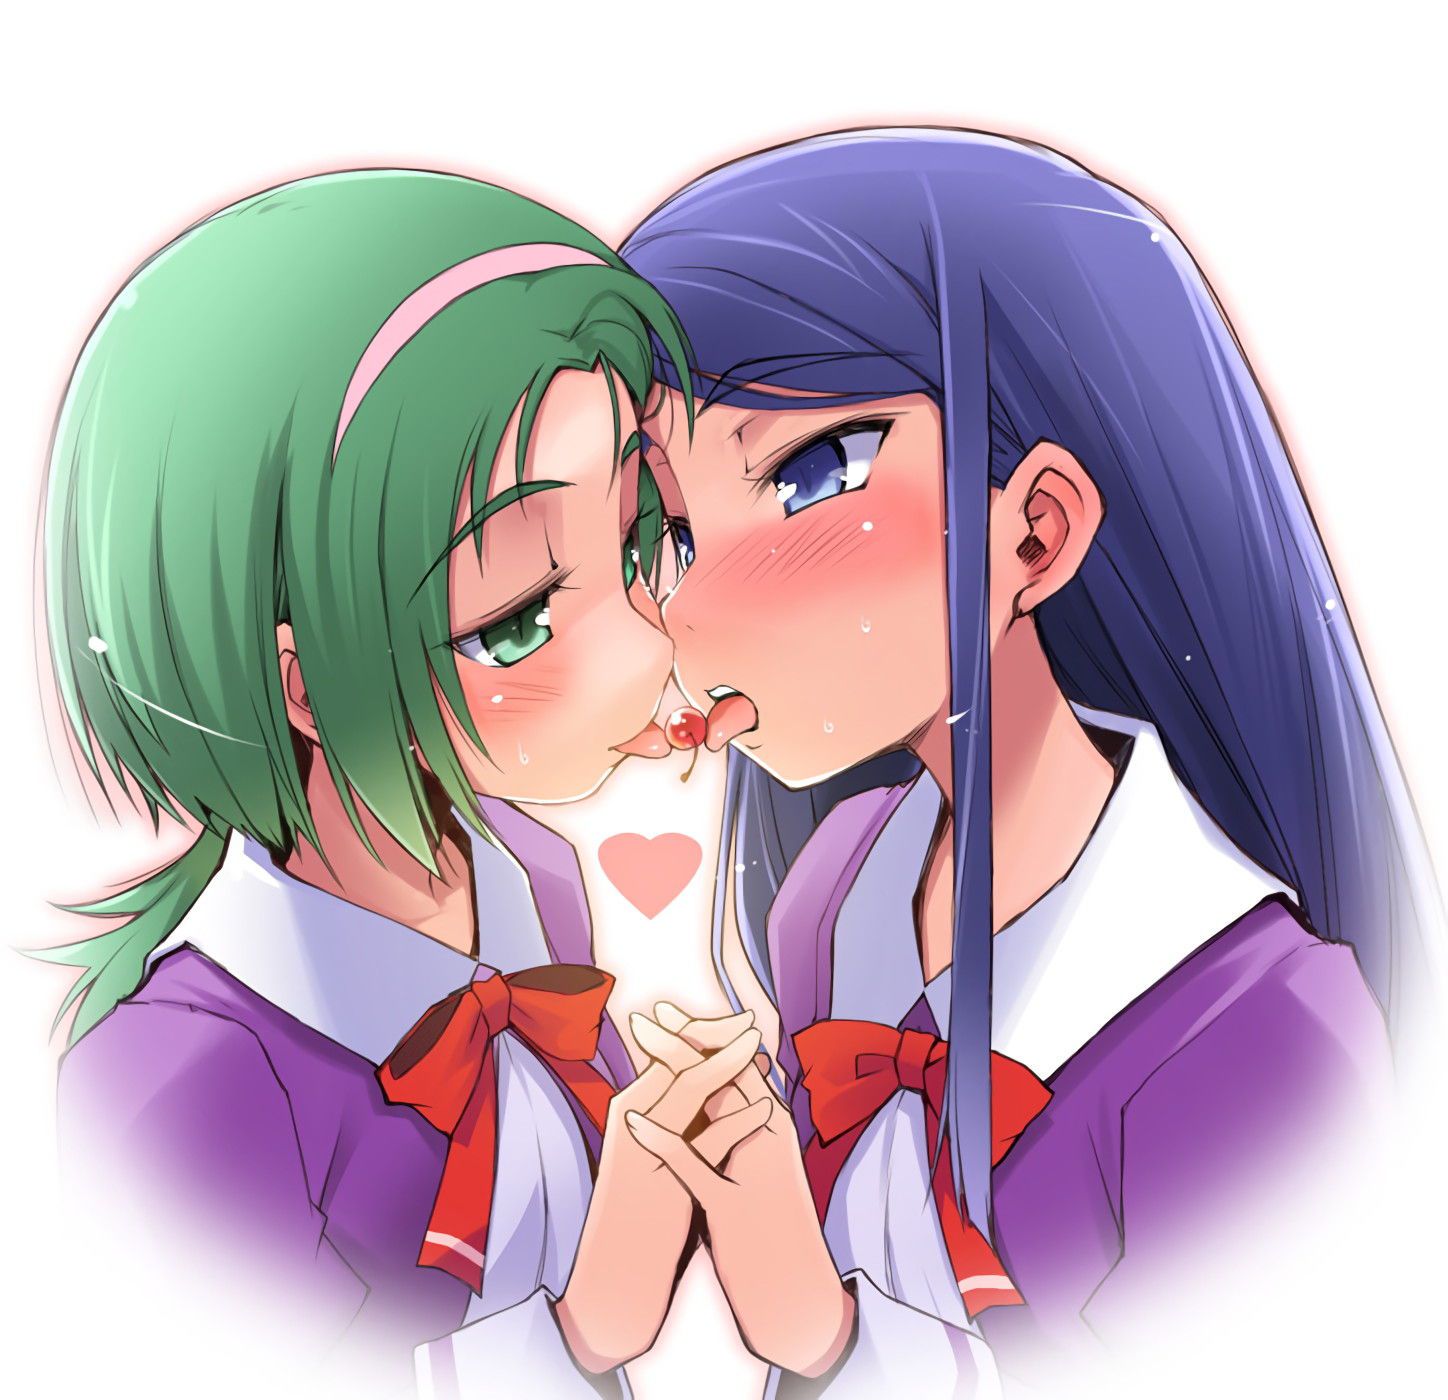 Image warehouse where people who expect Yuri and lesbian gather. 31